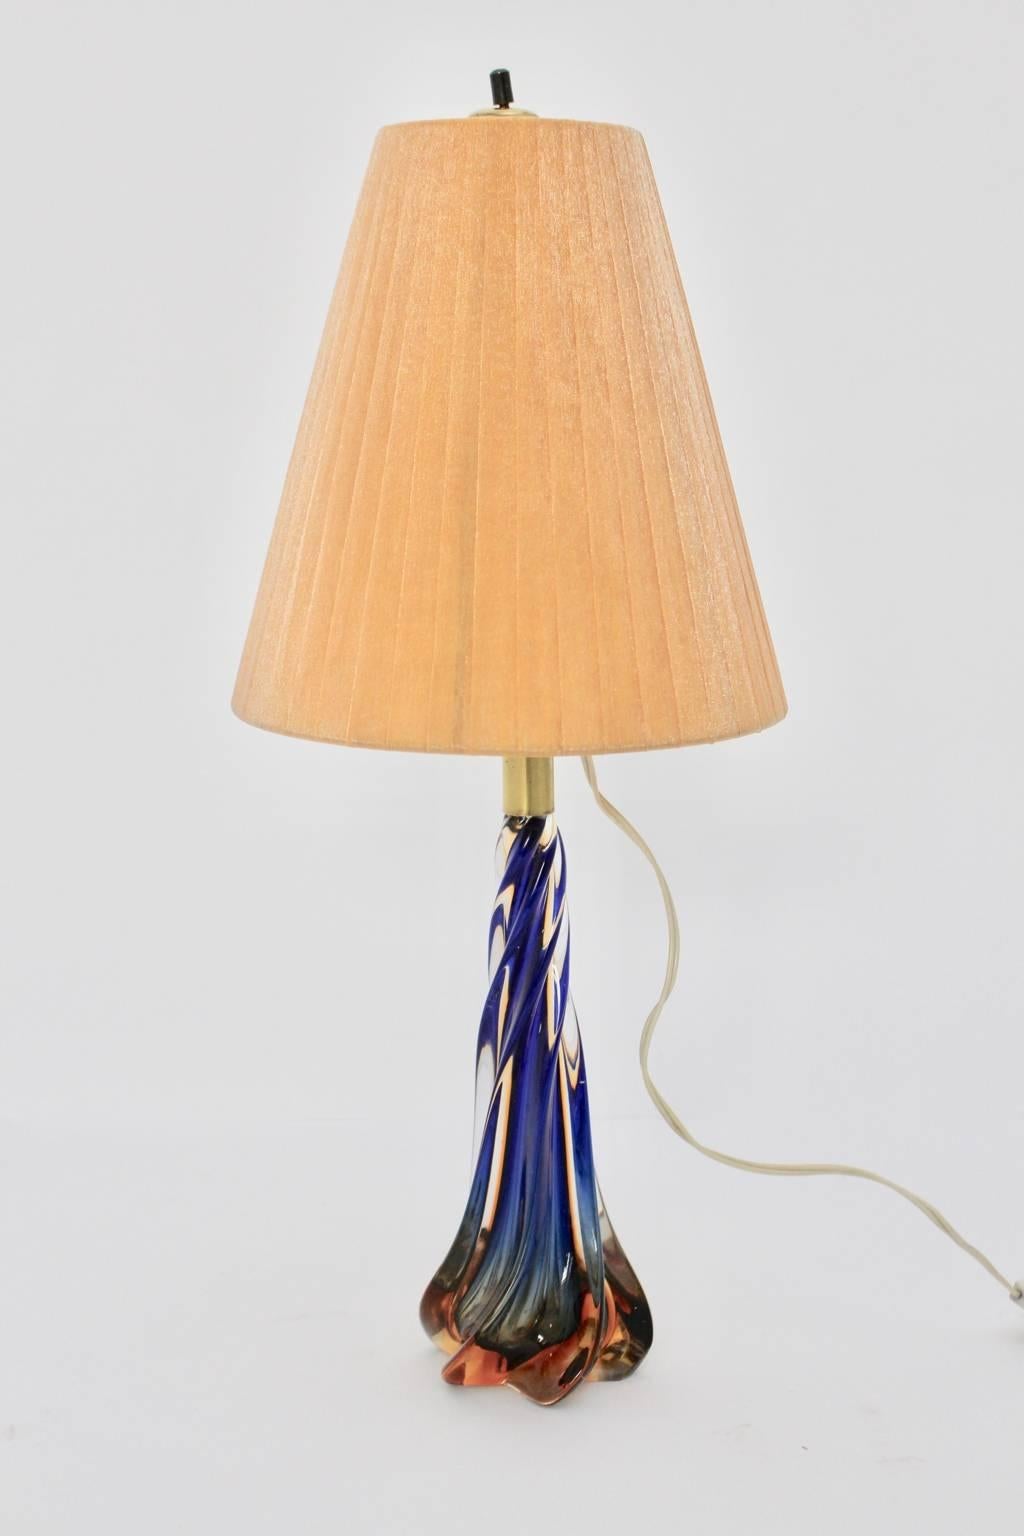 vintage murano glass table lamp